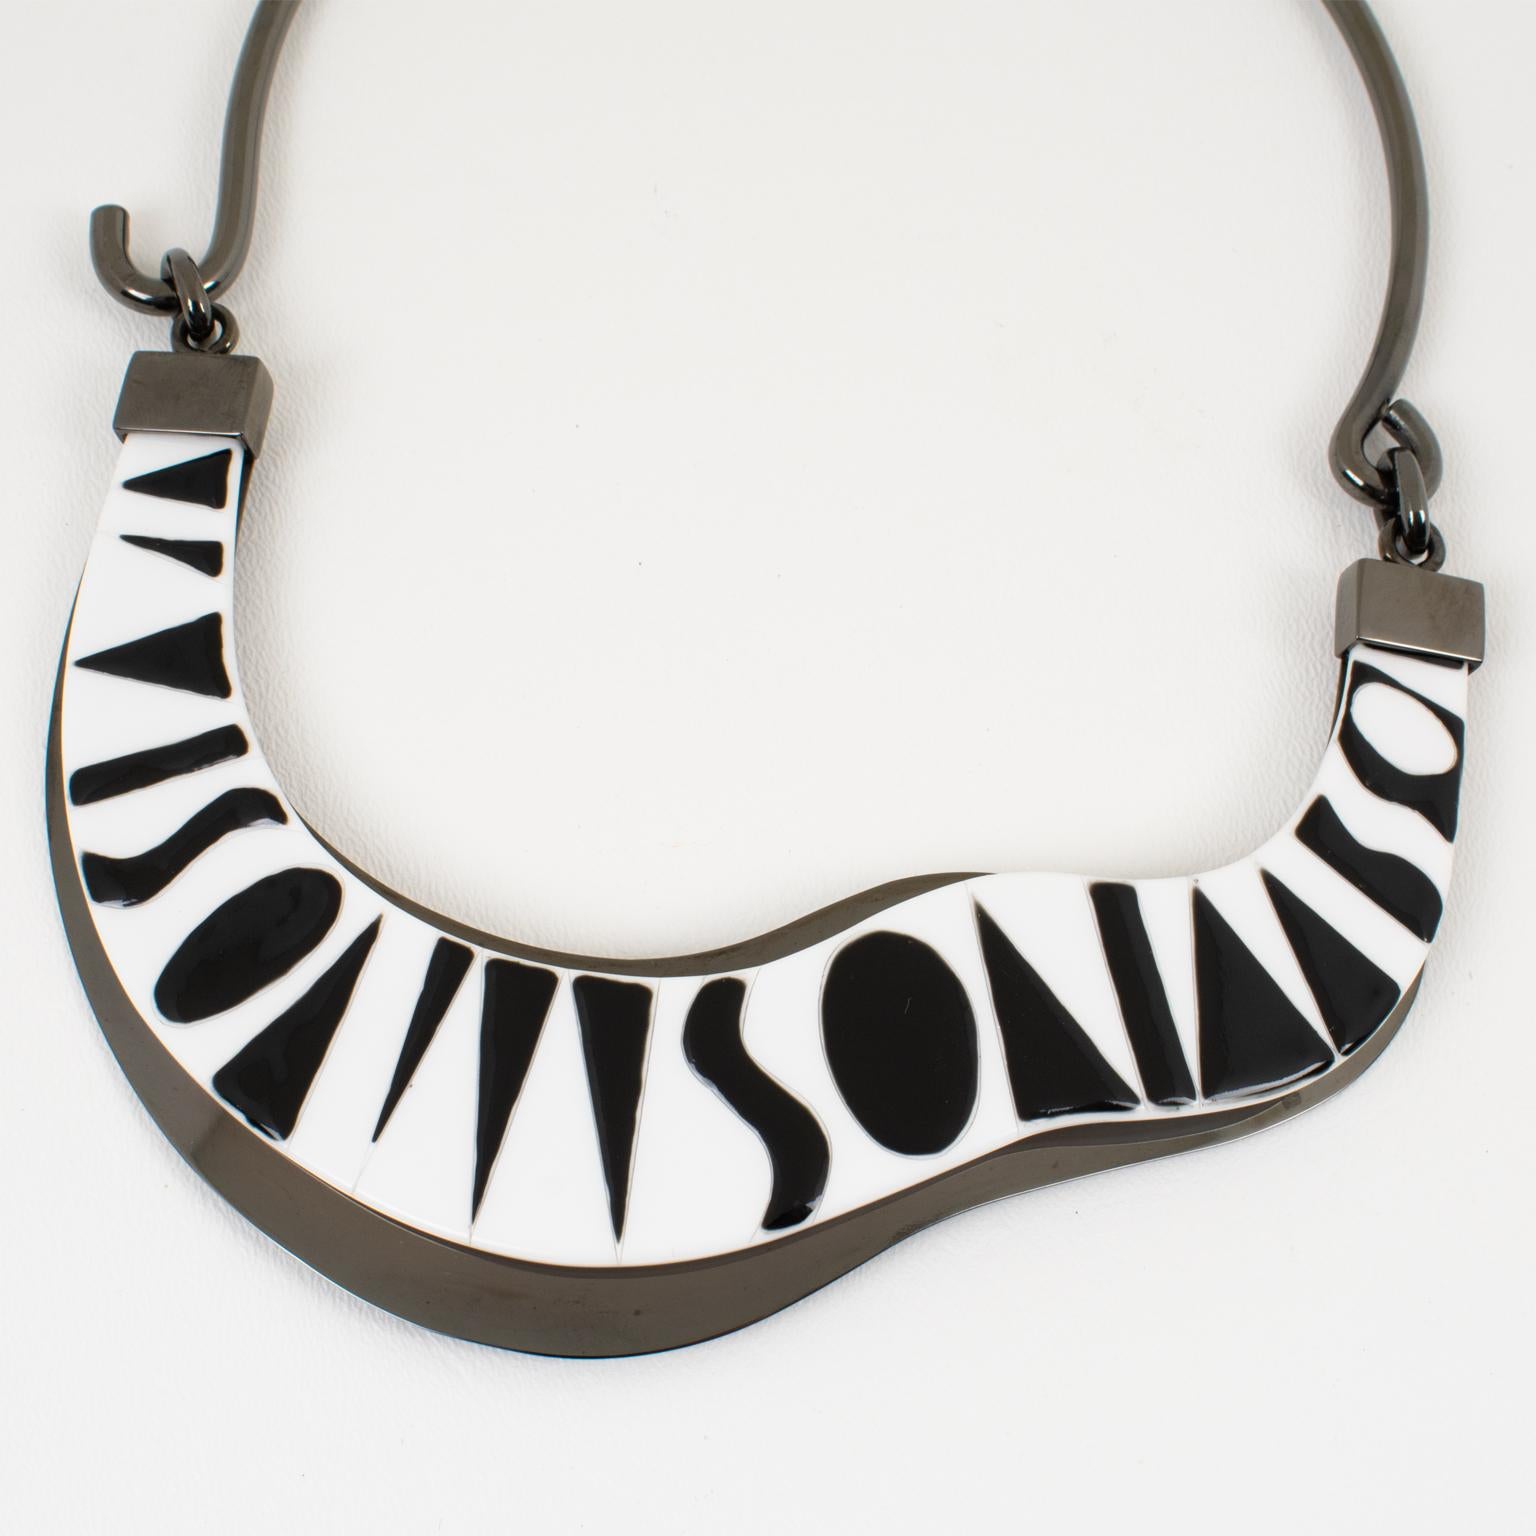 Missoni Black and White Lucite and Metal Choker Necklace, Runway Spring 2014 For Sale 3